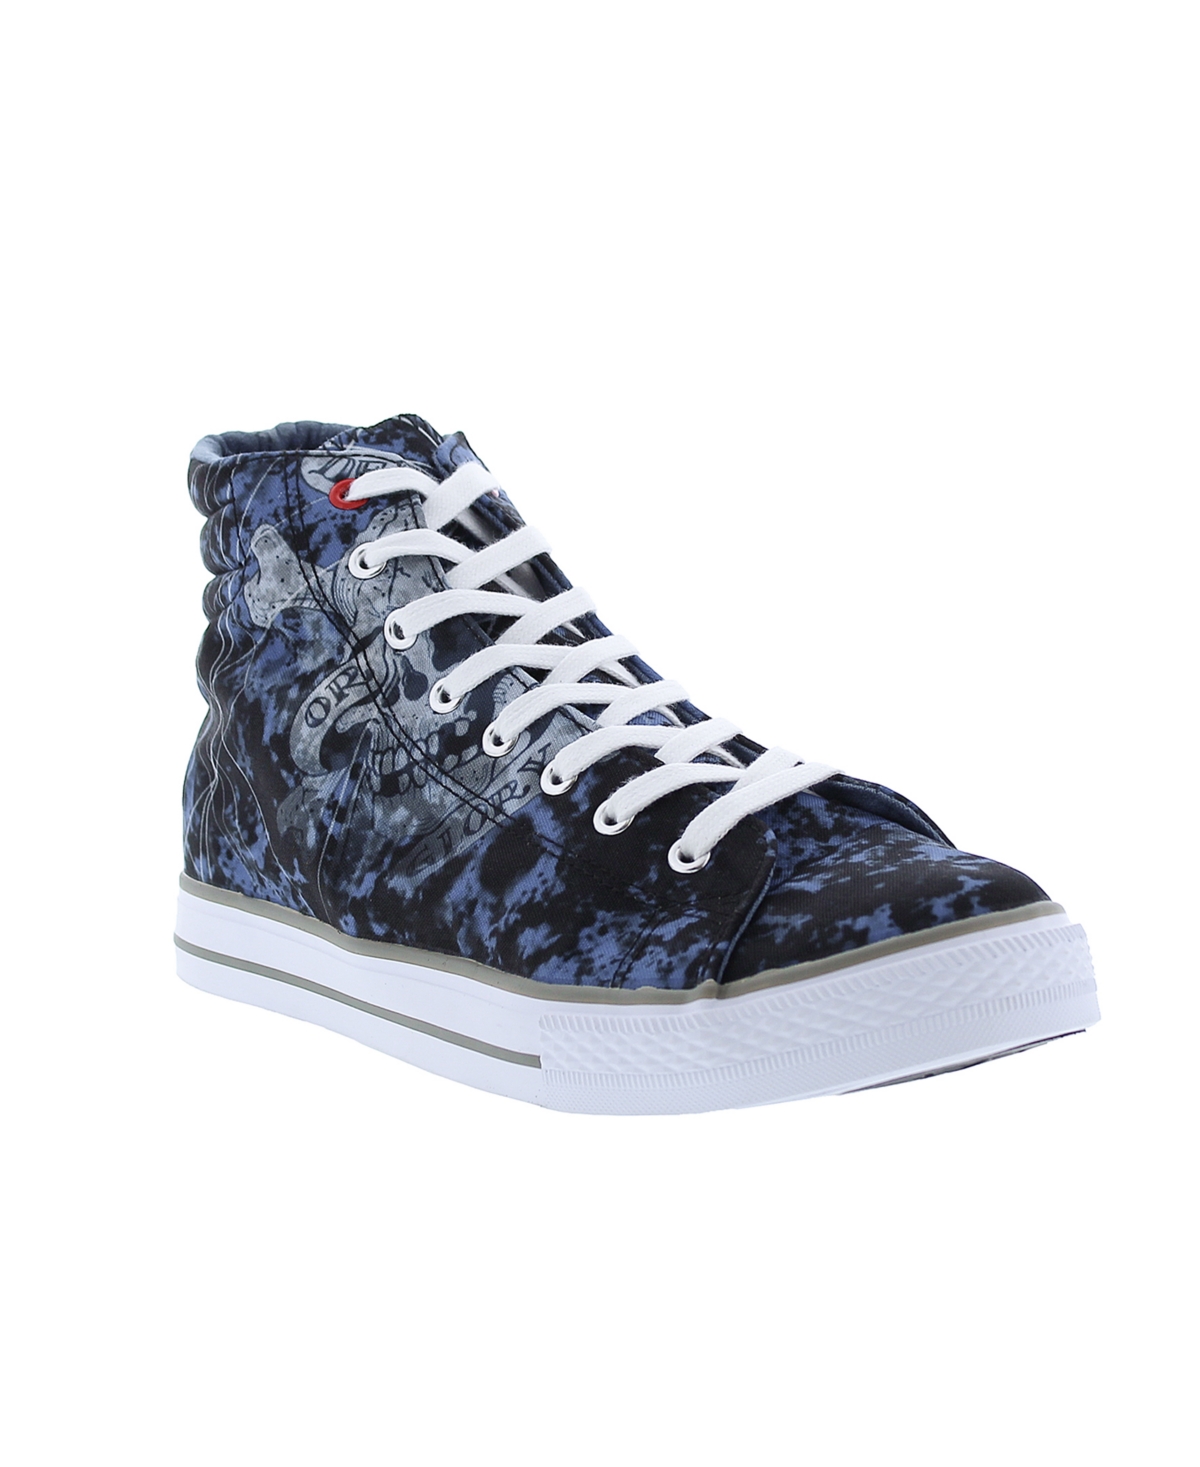 Ed Hardy Men's Justice High Top Sneakers Men's Shoes